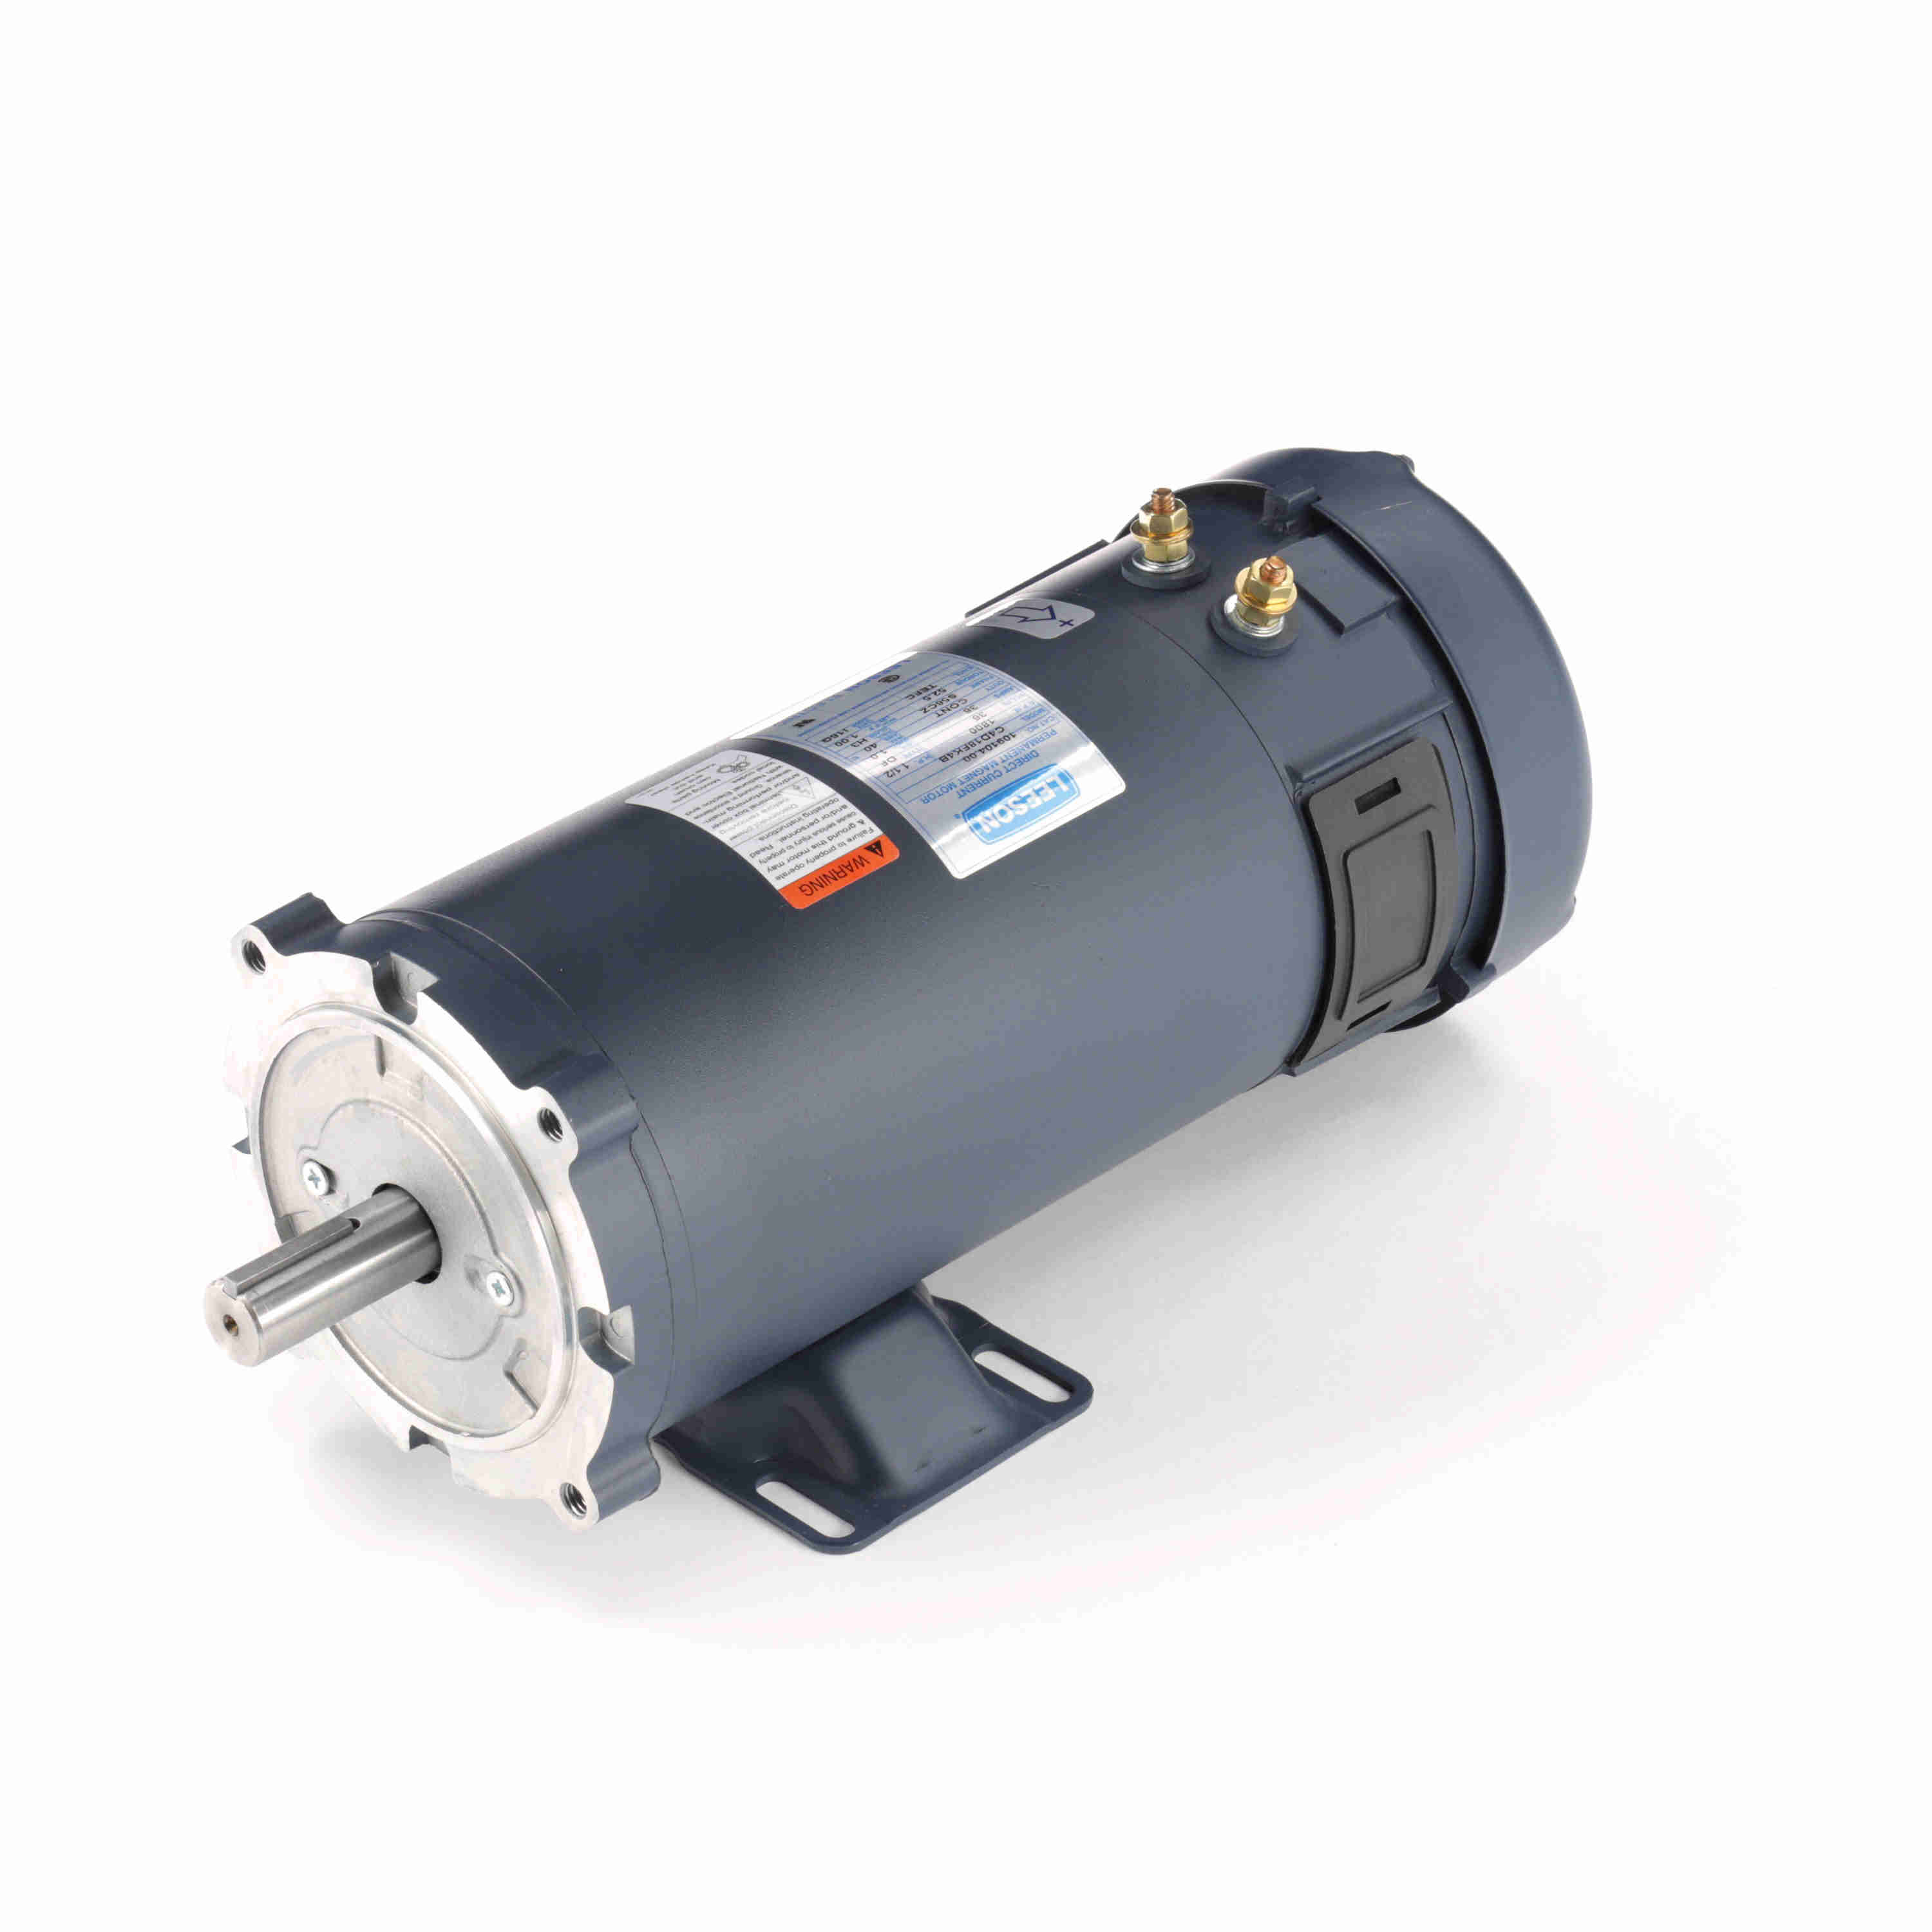 109104.00 Leeson 1.5HP Low Voltage DC Electric Motor, 1800RPM 2